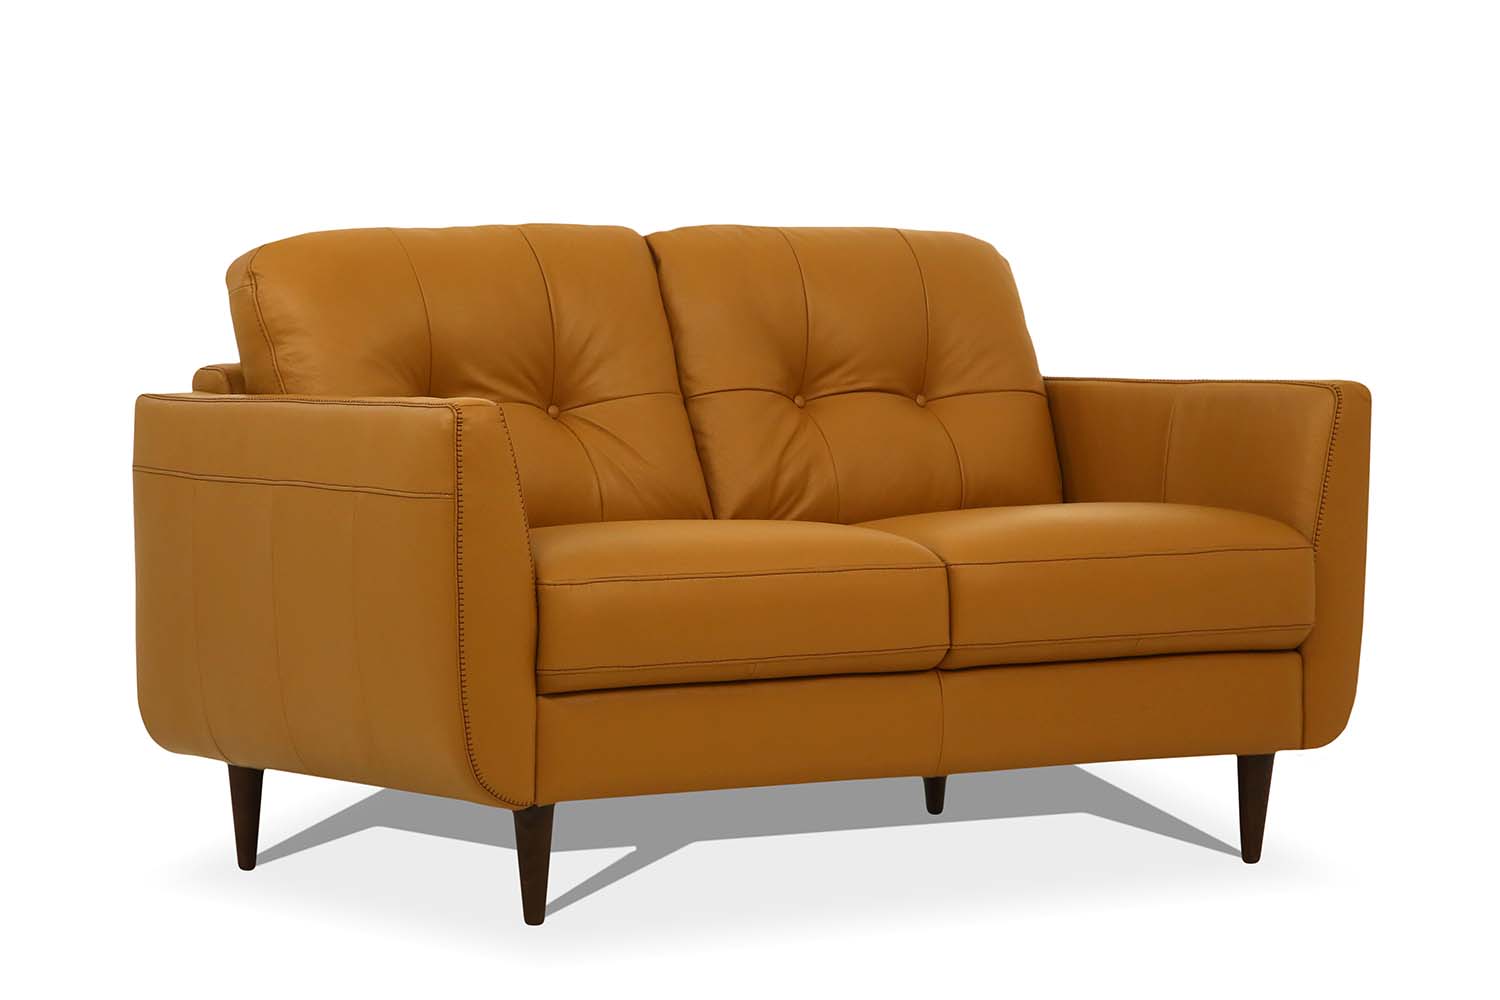 ACME Furniture Sofas & Couches - Loveseat, Camel Leather 54956